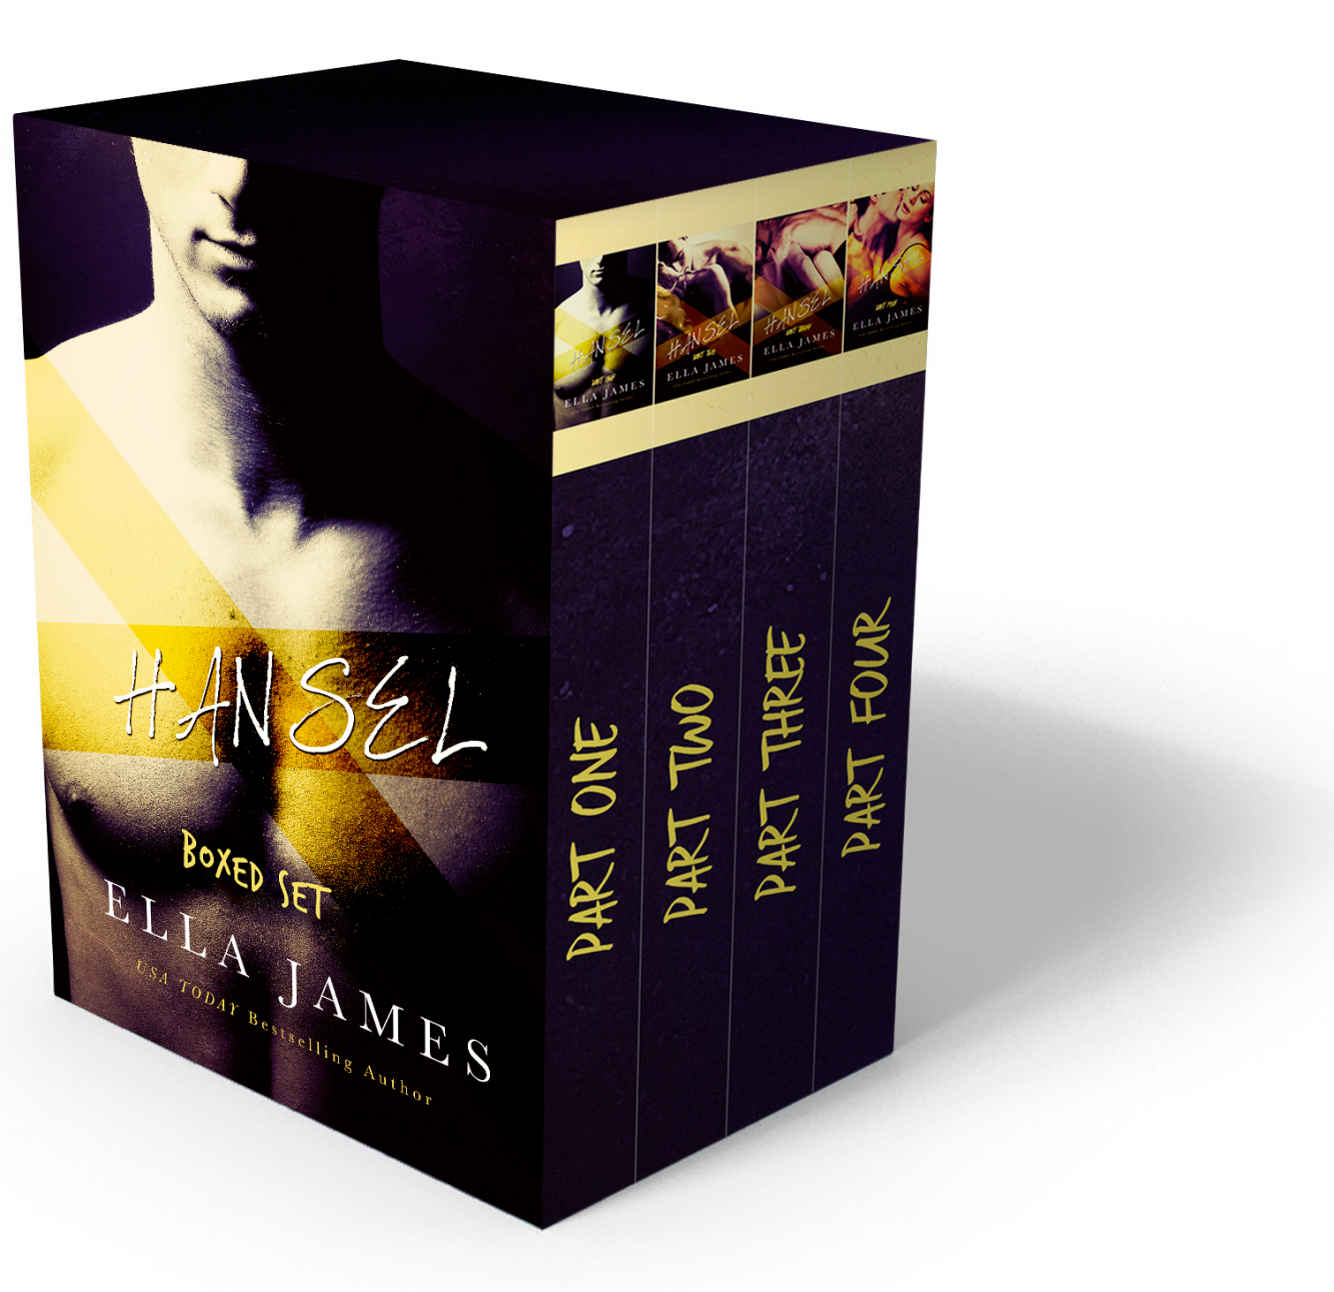 Hansel 1-4: The Complete Series